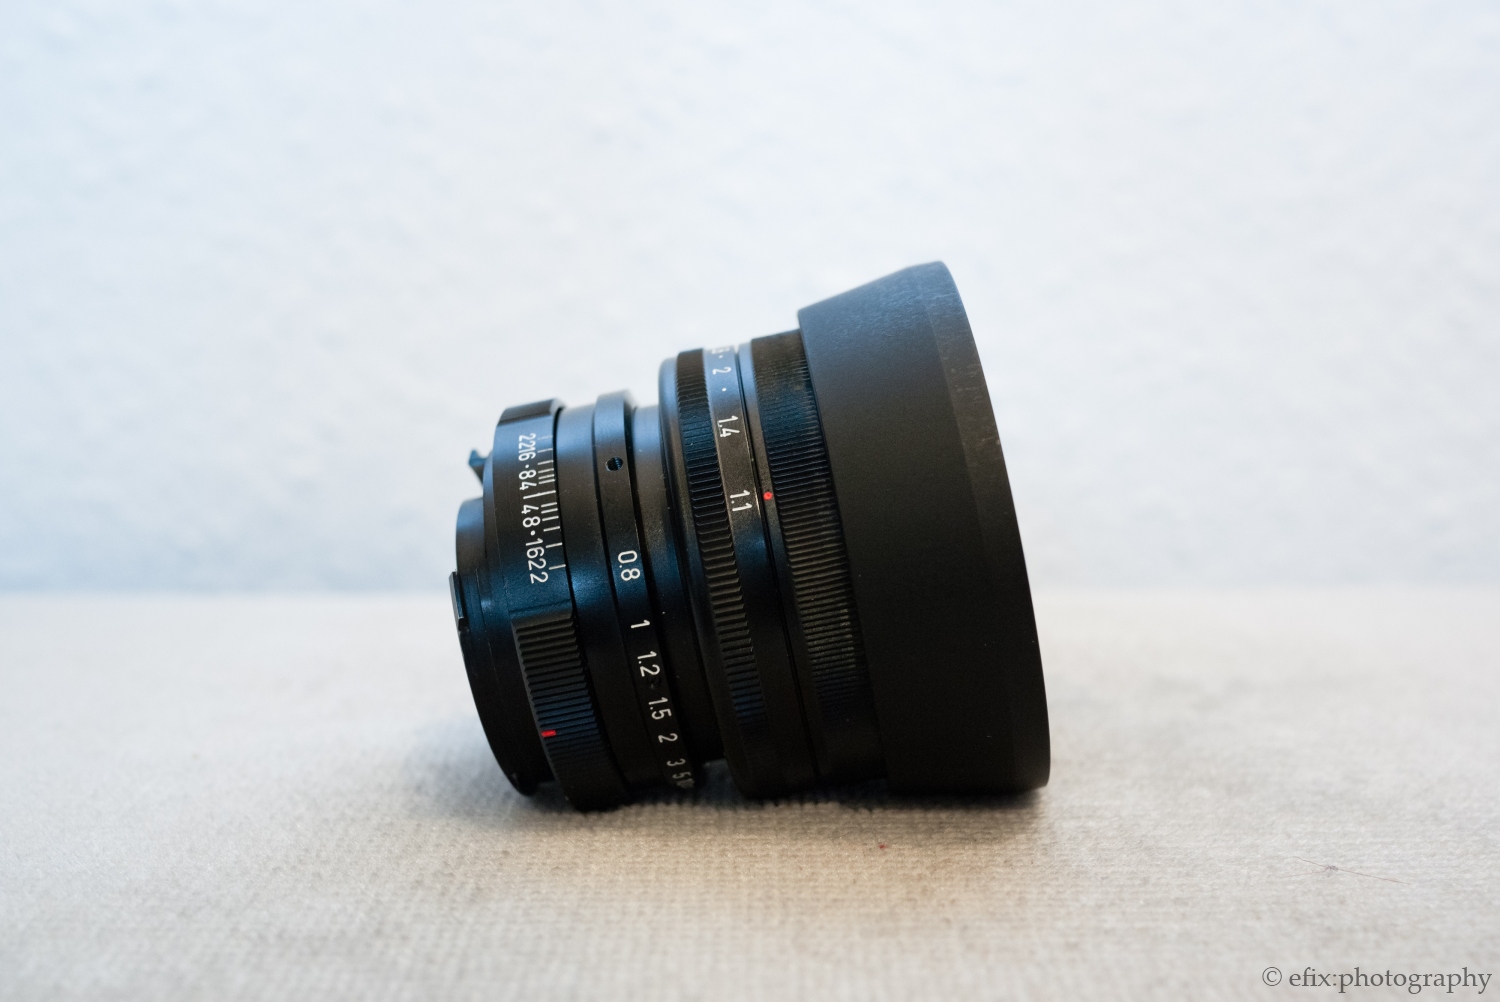 Review: MS-Optical Sonnetar 50mm f1.1 for Leica M - The Phoblographer